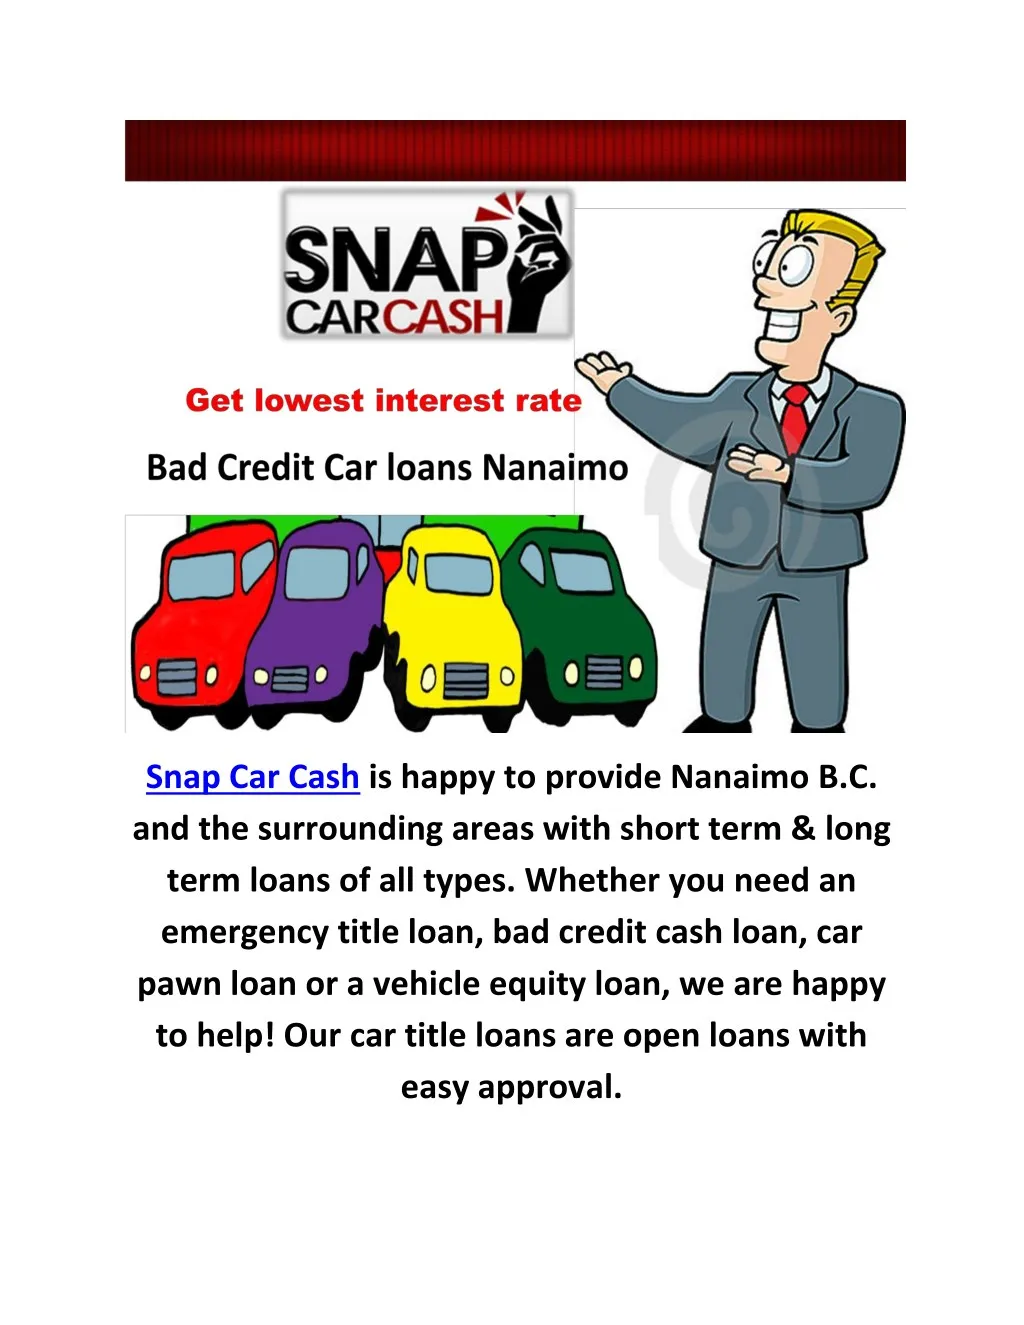 snap car cash is happy to provide nanaimo